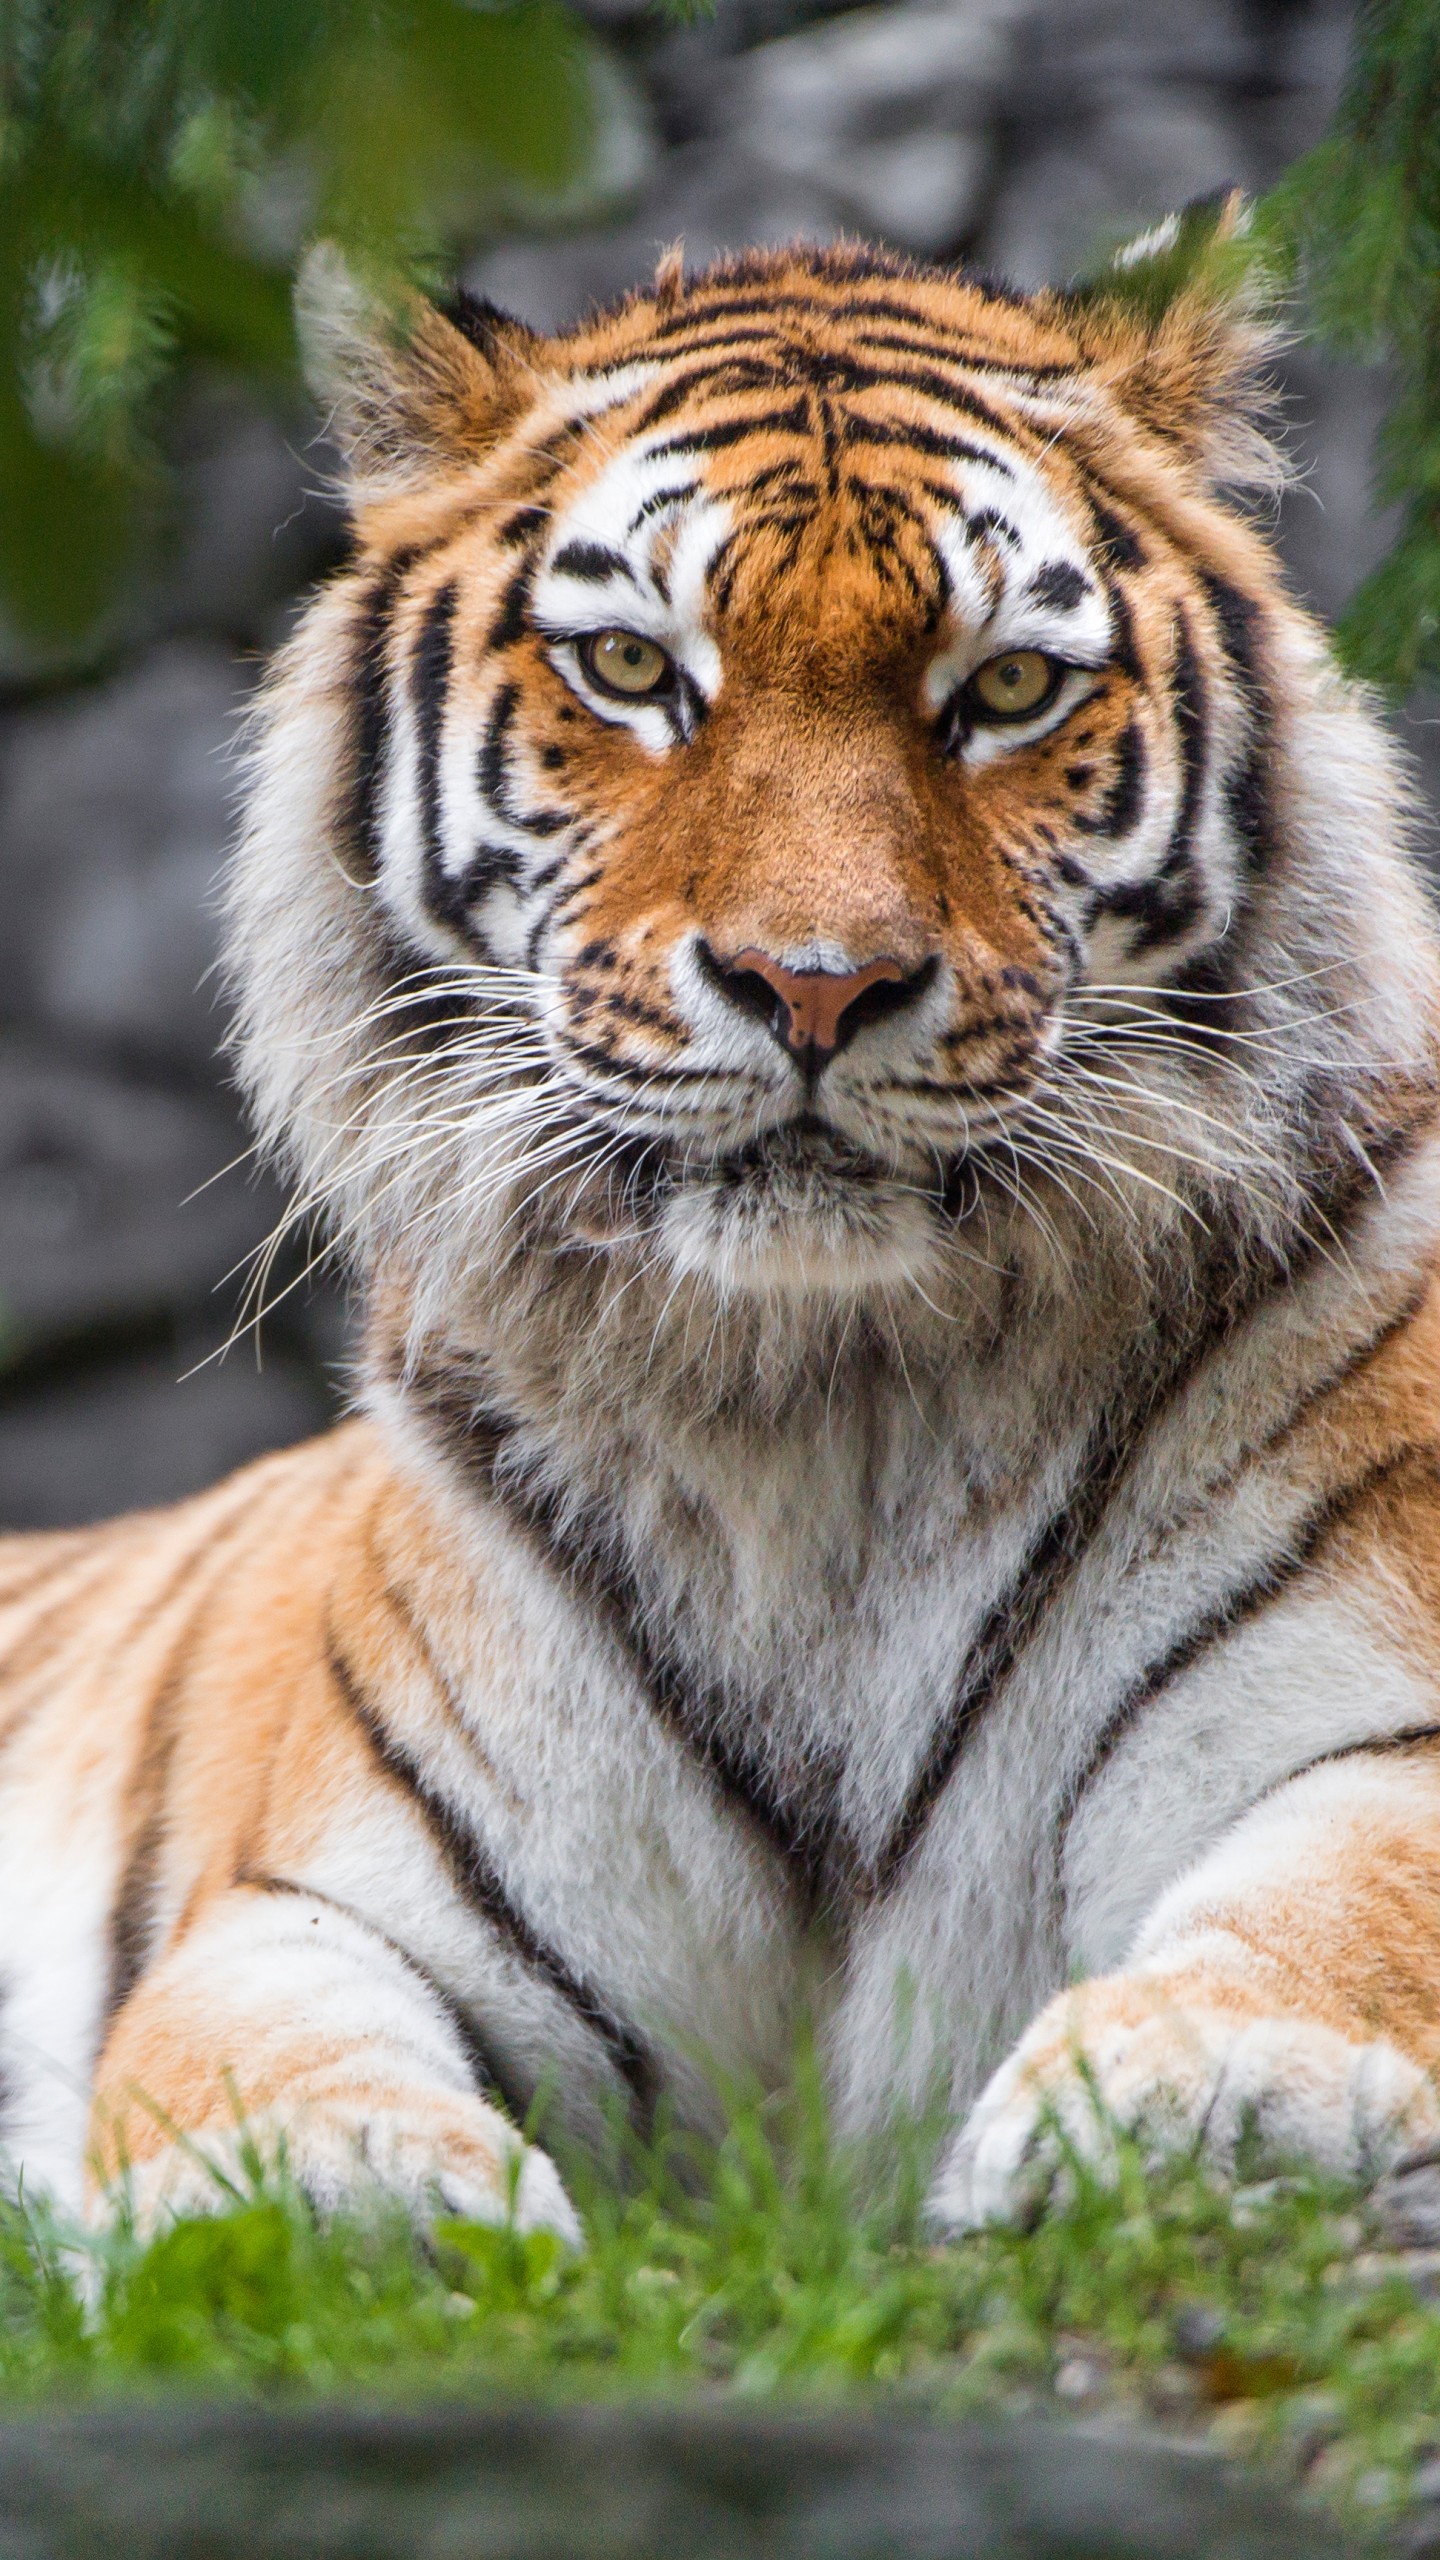 Tiger Image Hd Download , HD Wallpaper & Backgrounds